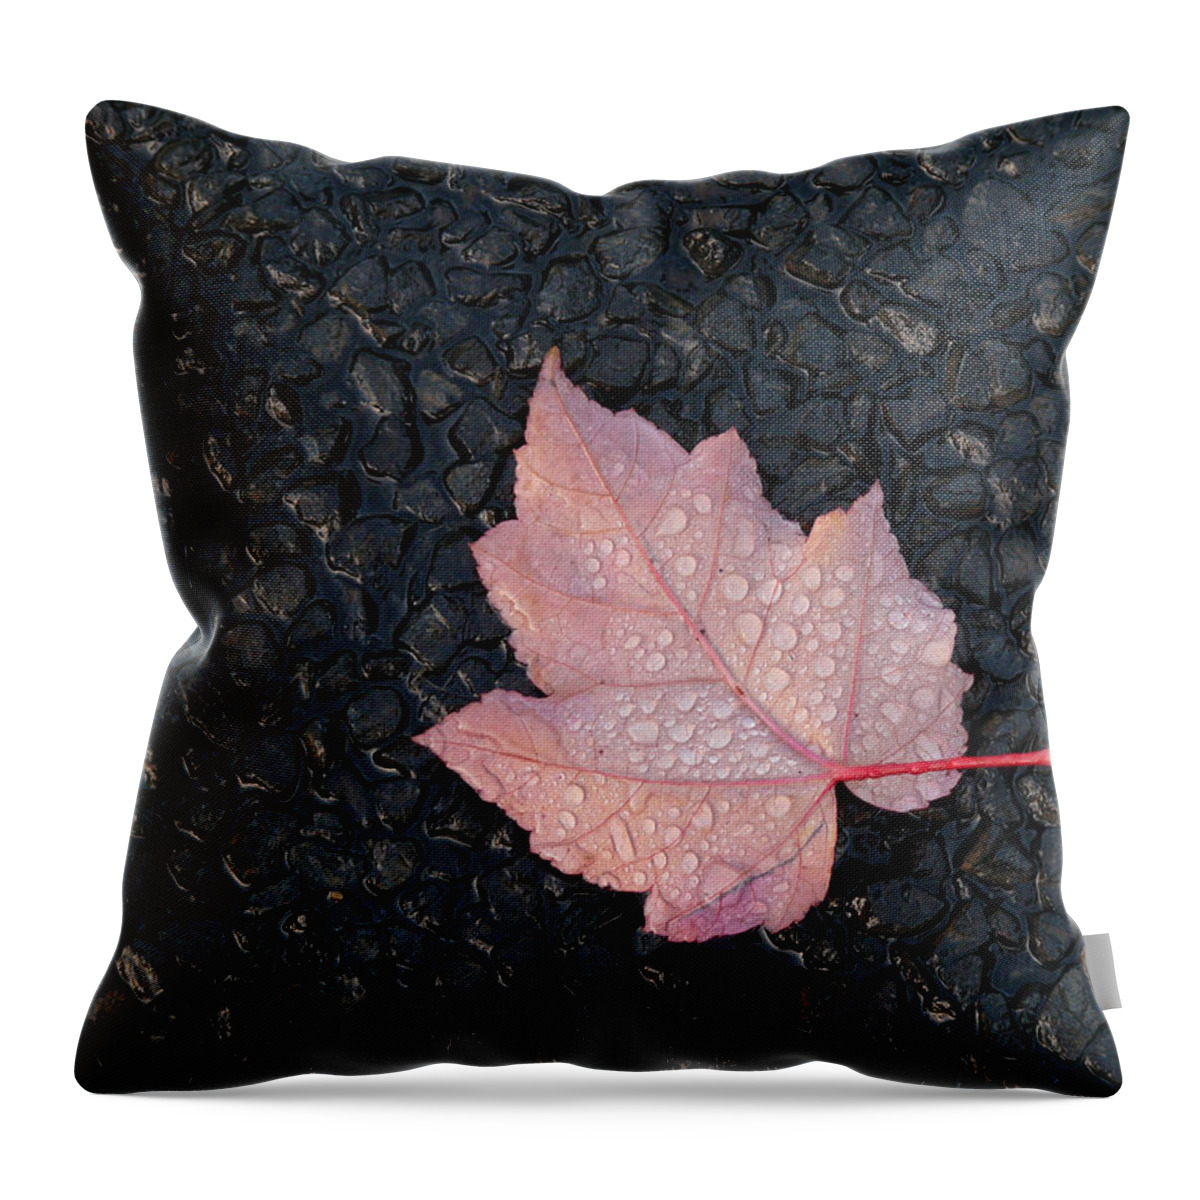 Rain Throw Pillow featuring the photograph After The Rain by Evelyn Tambour